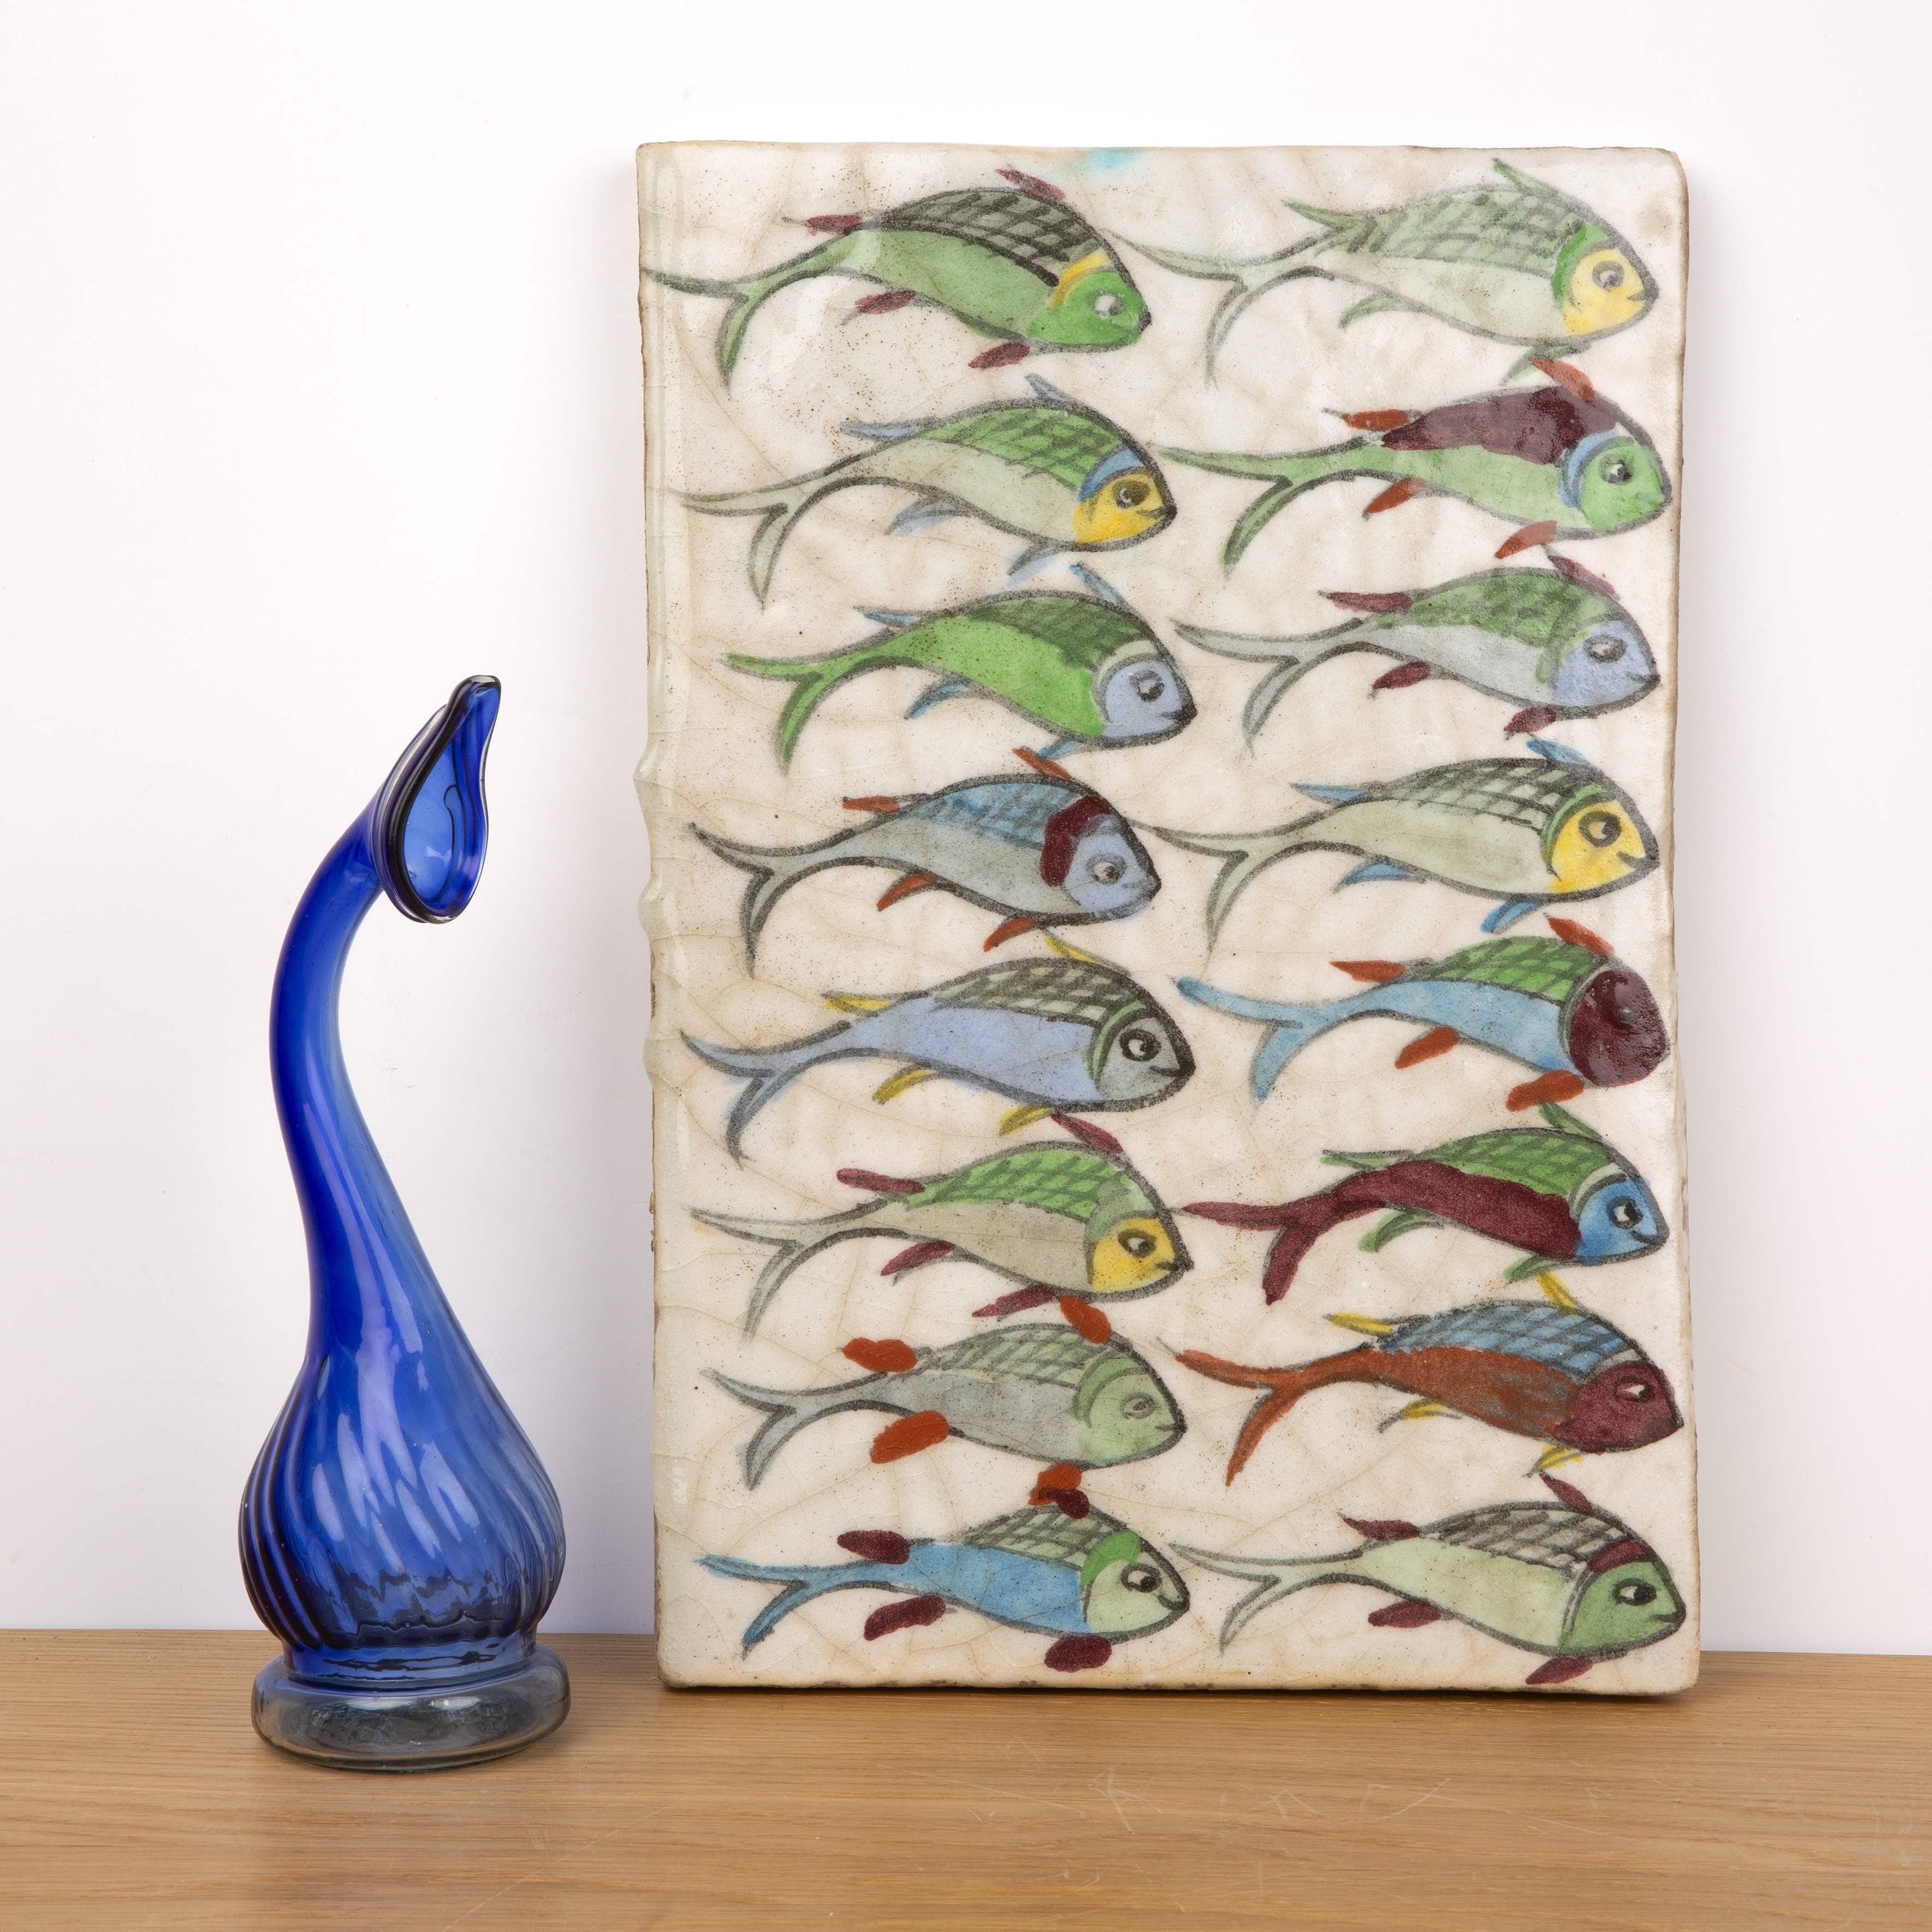 Polychrome tile Persian painted with scaled fish, 35cm long x 24cm wide x 2cm deep, together with